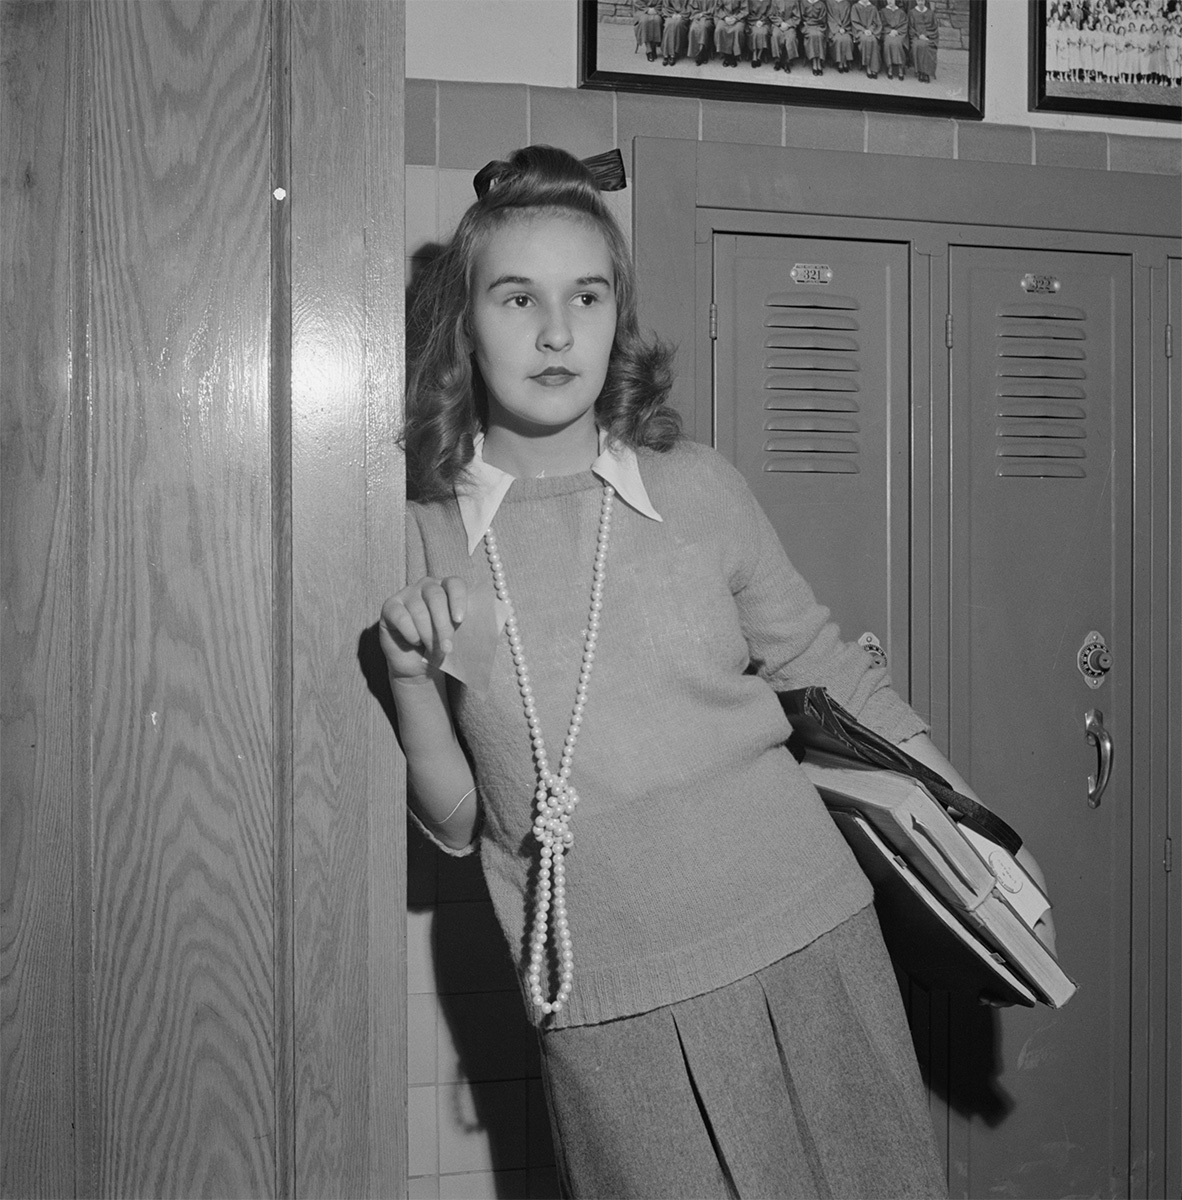 Washington, D.C. Sweaters and long ropes of beads are popular with the girls at Woodrow Wilson High School, October 1943 - Library of Congress<p>© Esther Bubley</p>